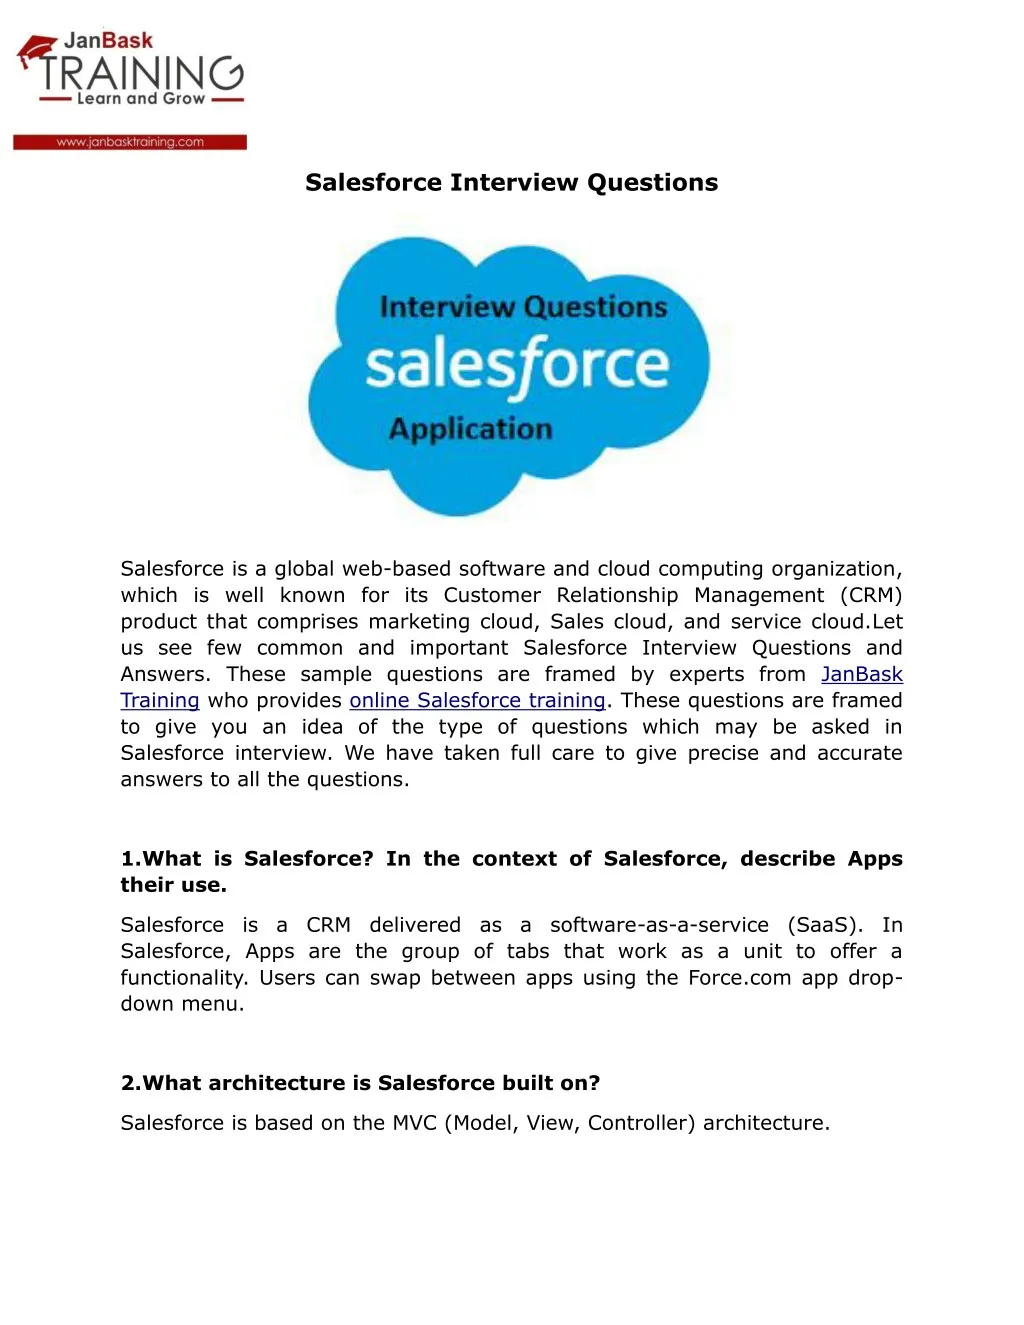 salesforce interview questions